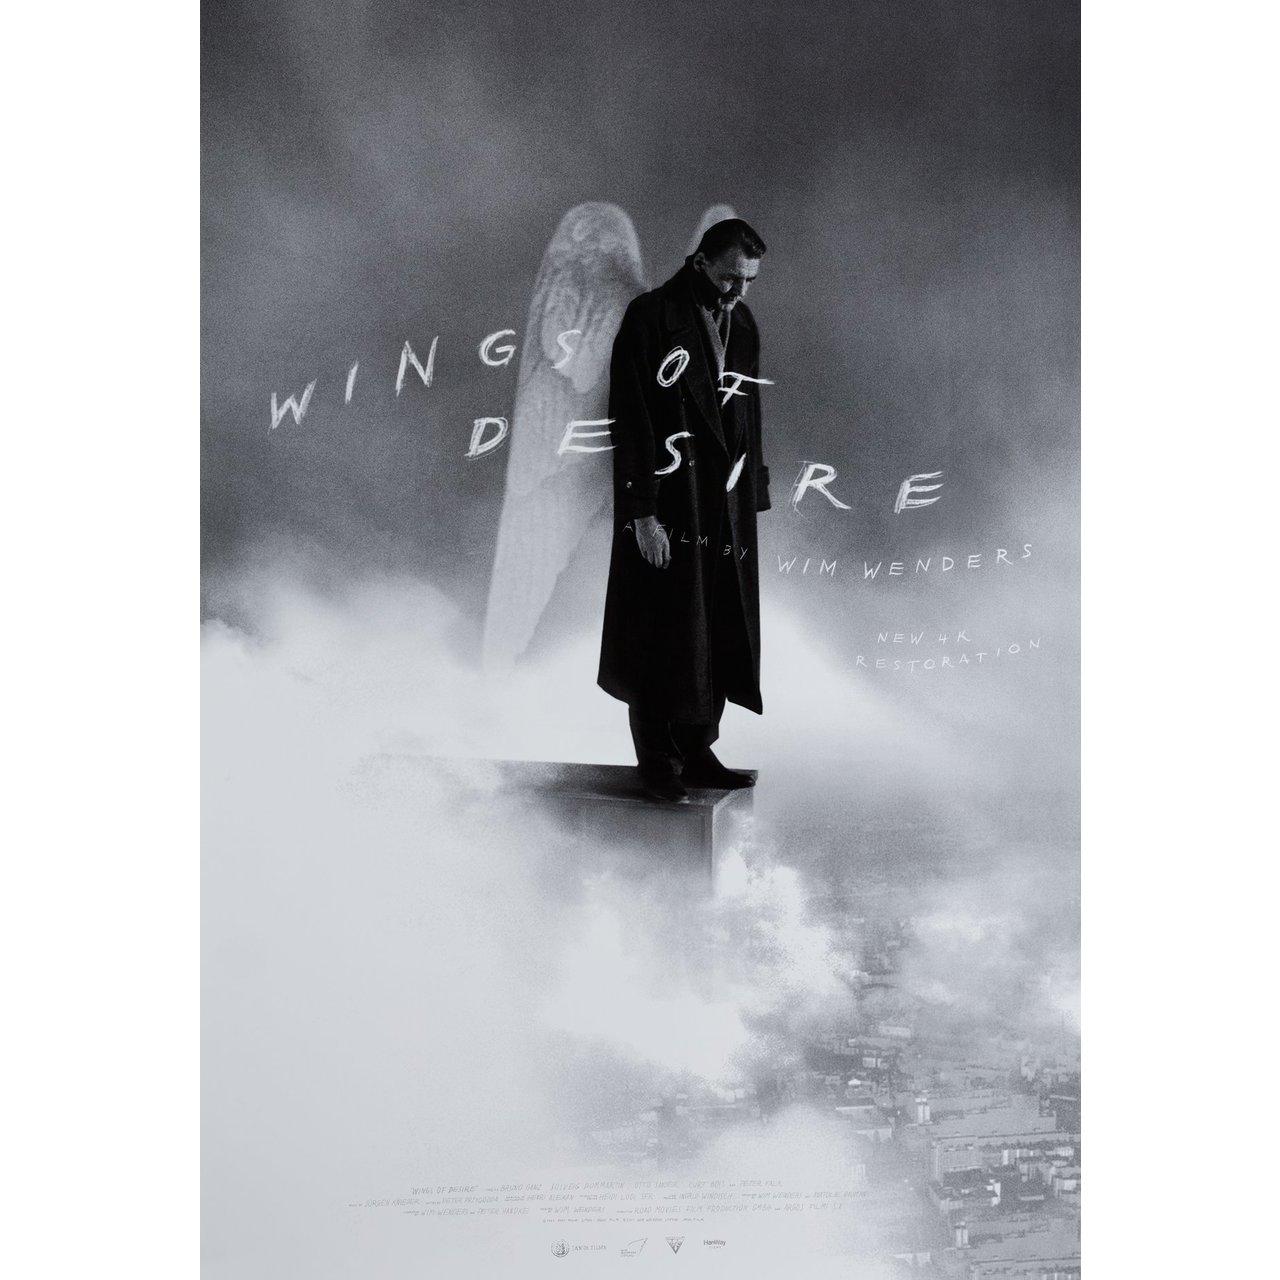 Original 2018 re-release U.S. one sheet poster for the 1987 film Wings of Desire (Der Himmel uber Berlin) directed by Wim Wenders with Bruno Ganz / Solveig Dommartin / Otto Sander / Curt Bois. Very Good-Fine condition, rolled. Please note: the size